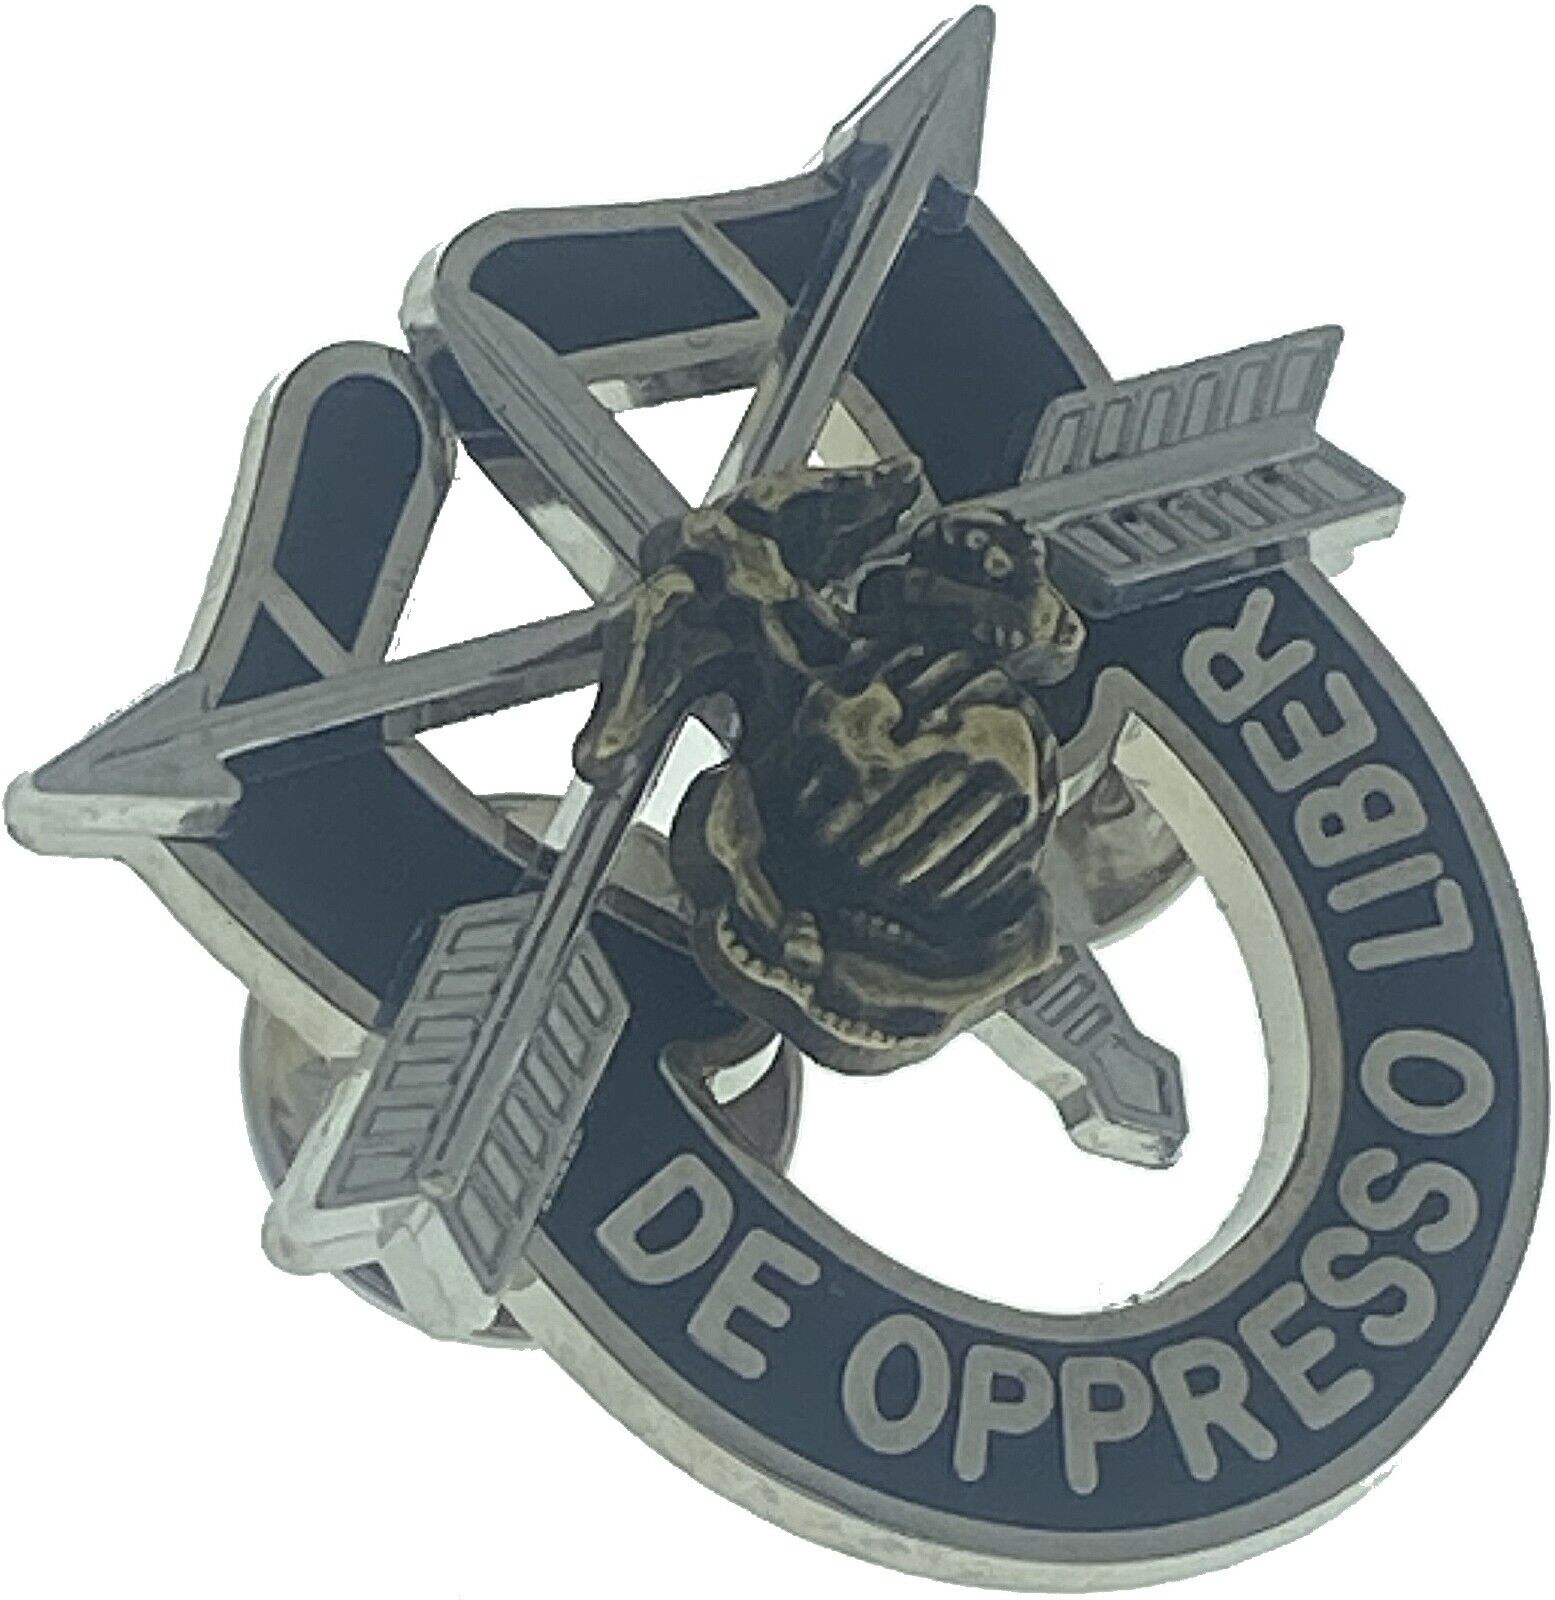 SPECIAL FORCES DE OPPRESSO LIBER USMC Marines Corp Military Veteran US ARMY Pin